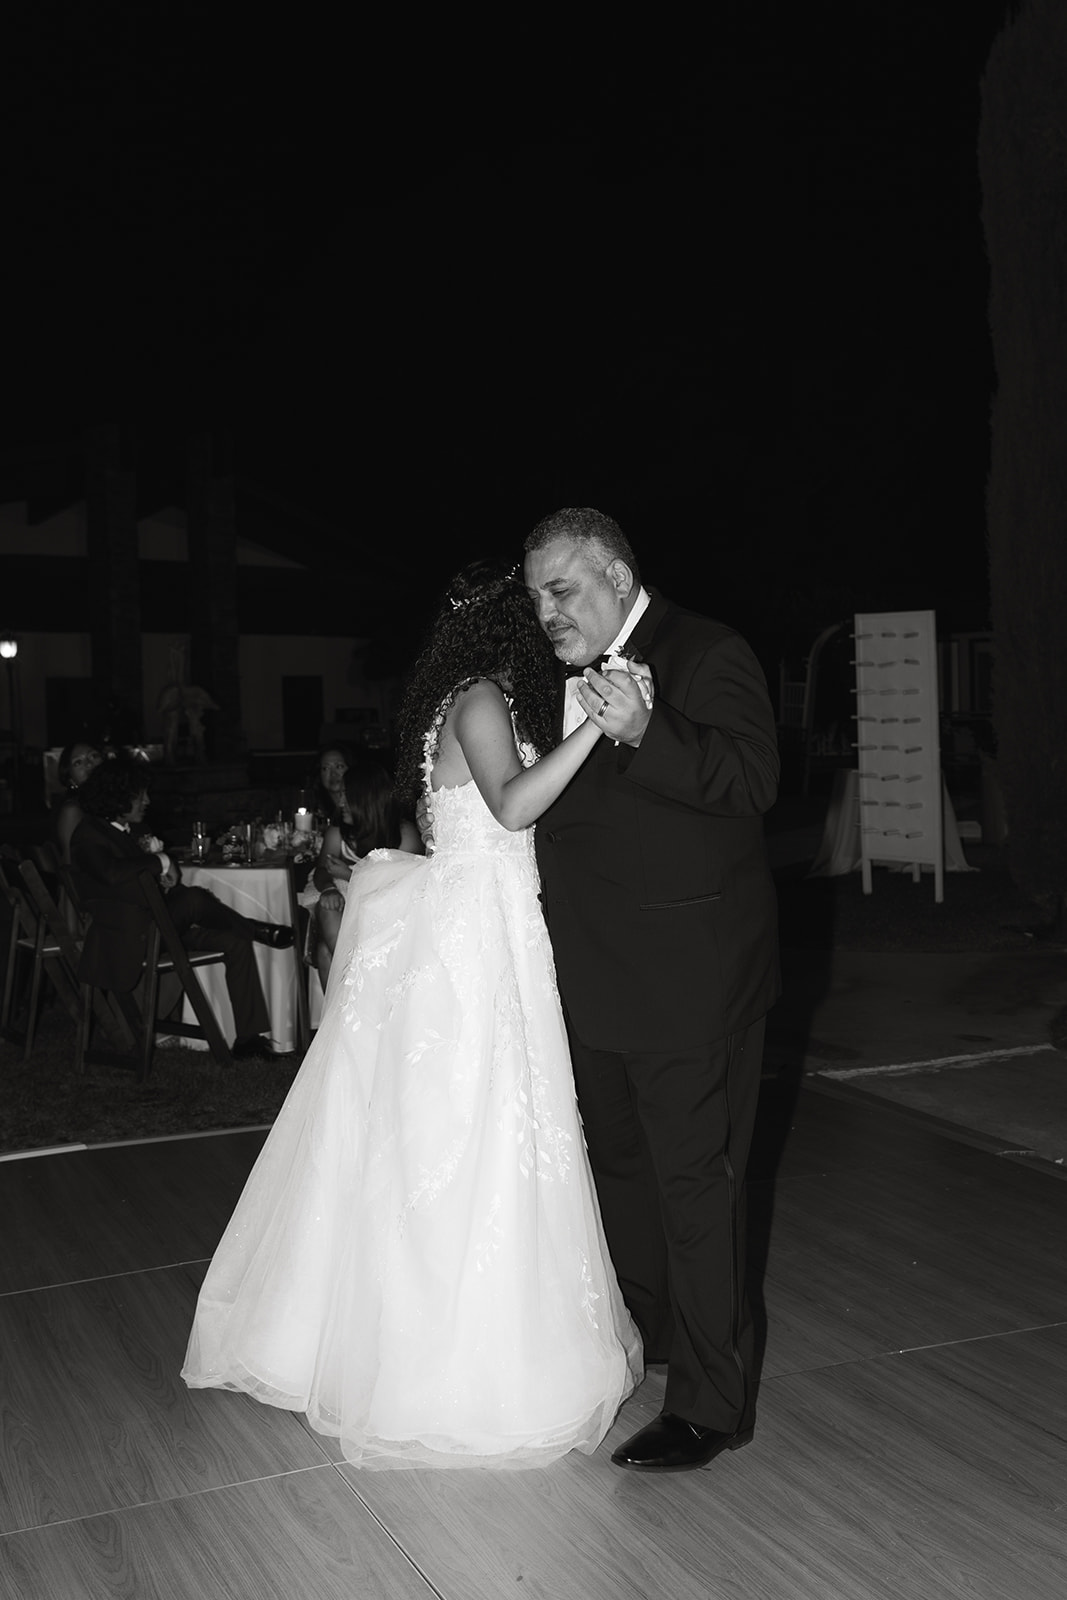 griffith house wedding anaheim california father daughter first dance mother son first dance emotional black and white